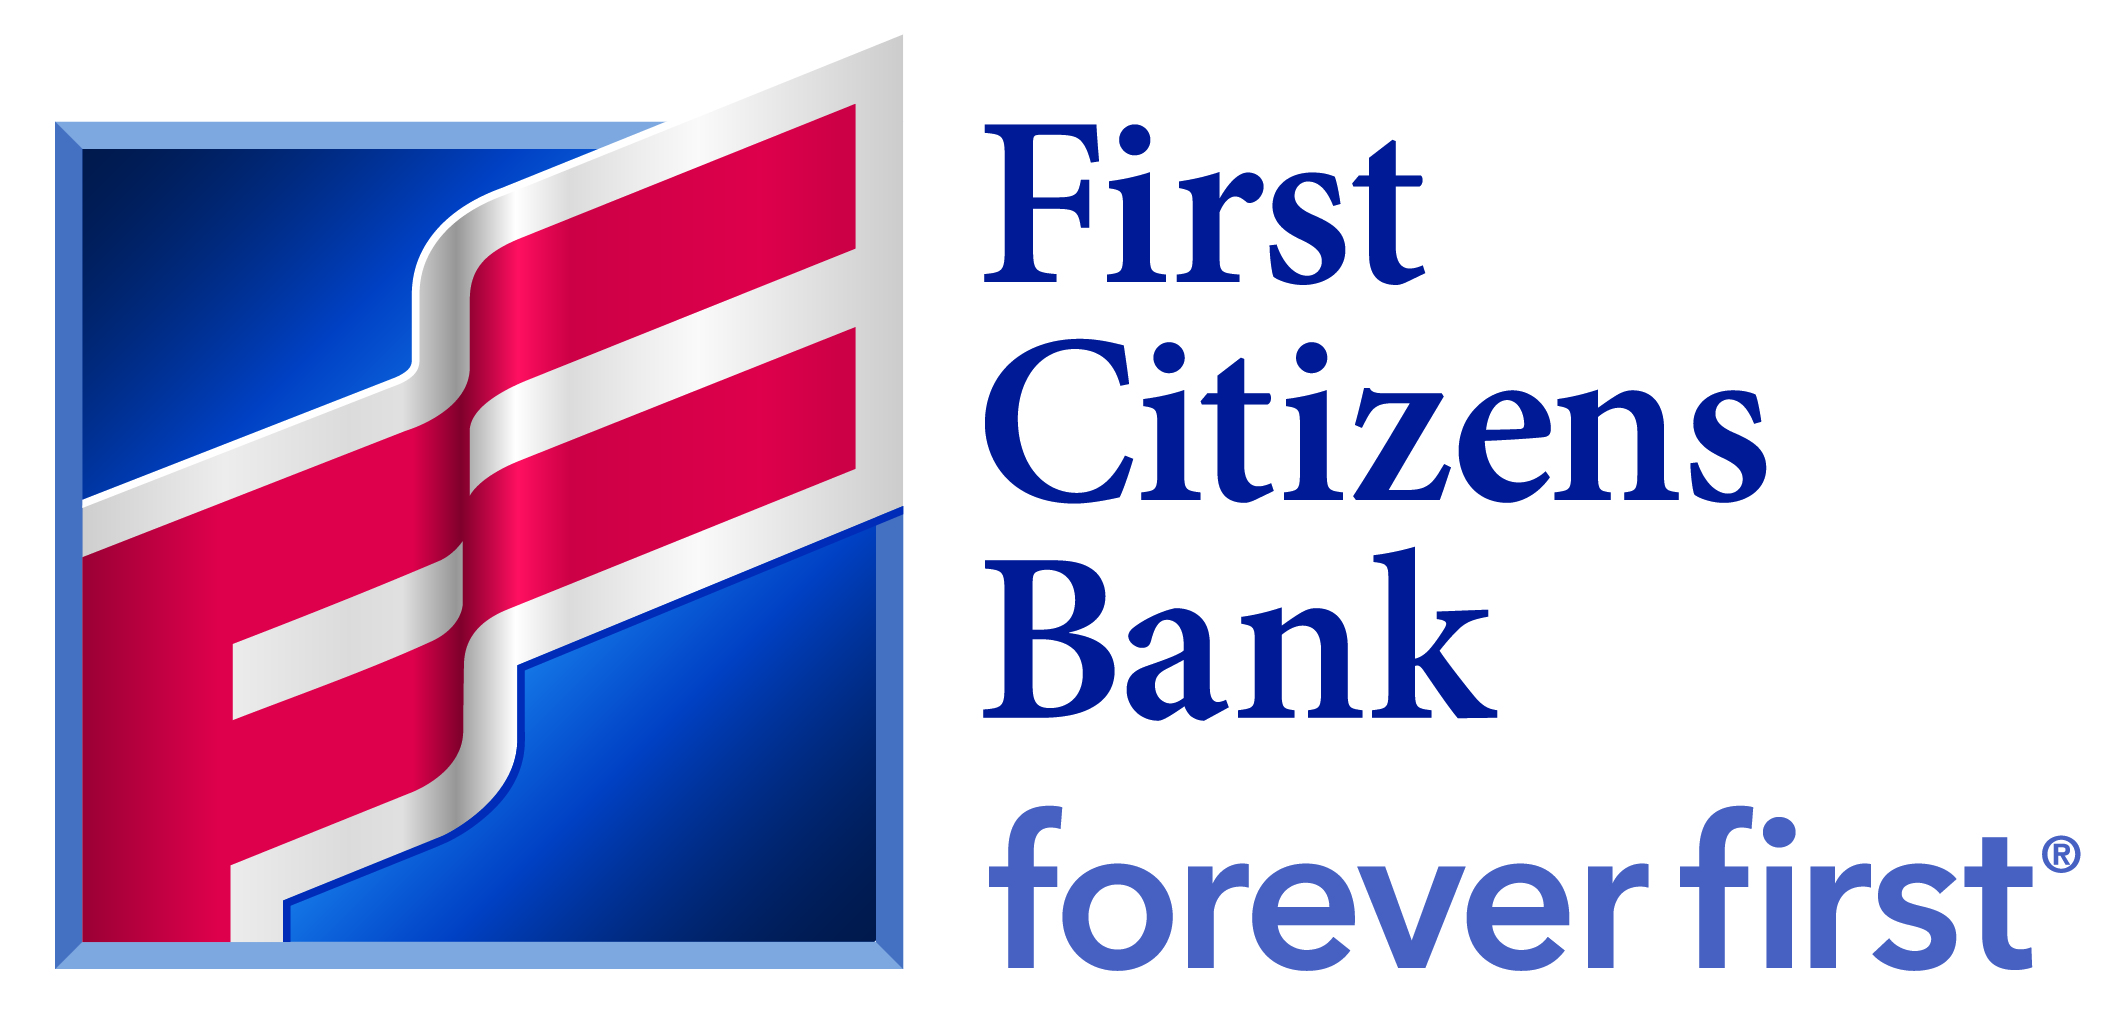 First Citizens Bank / Silicon Valley Bank